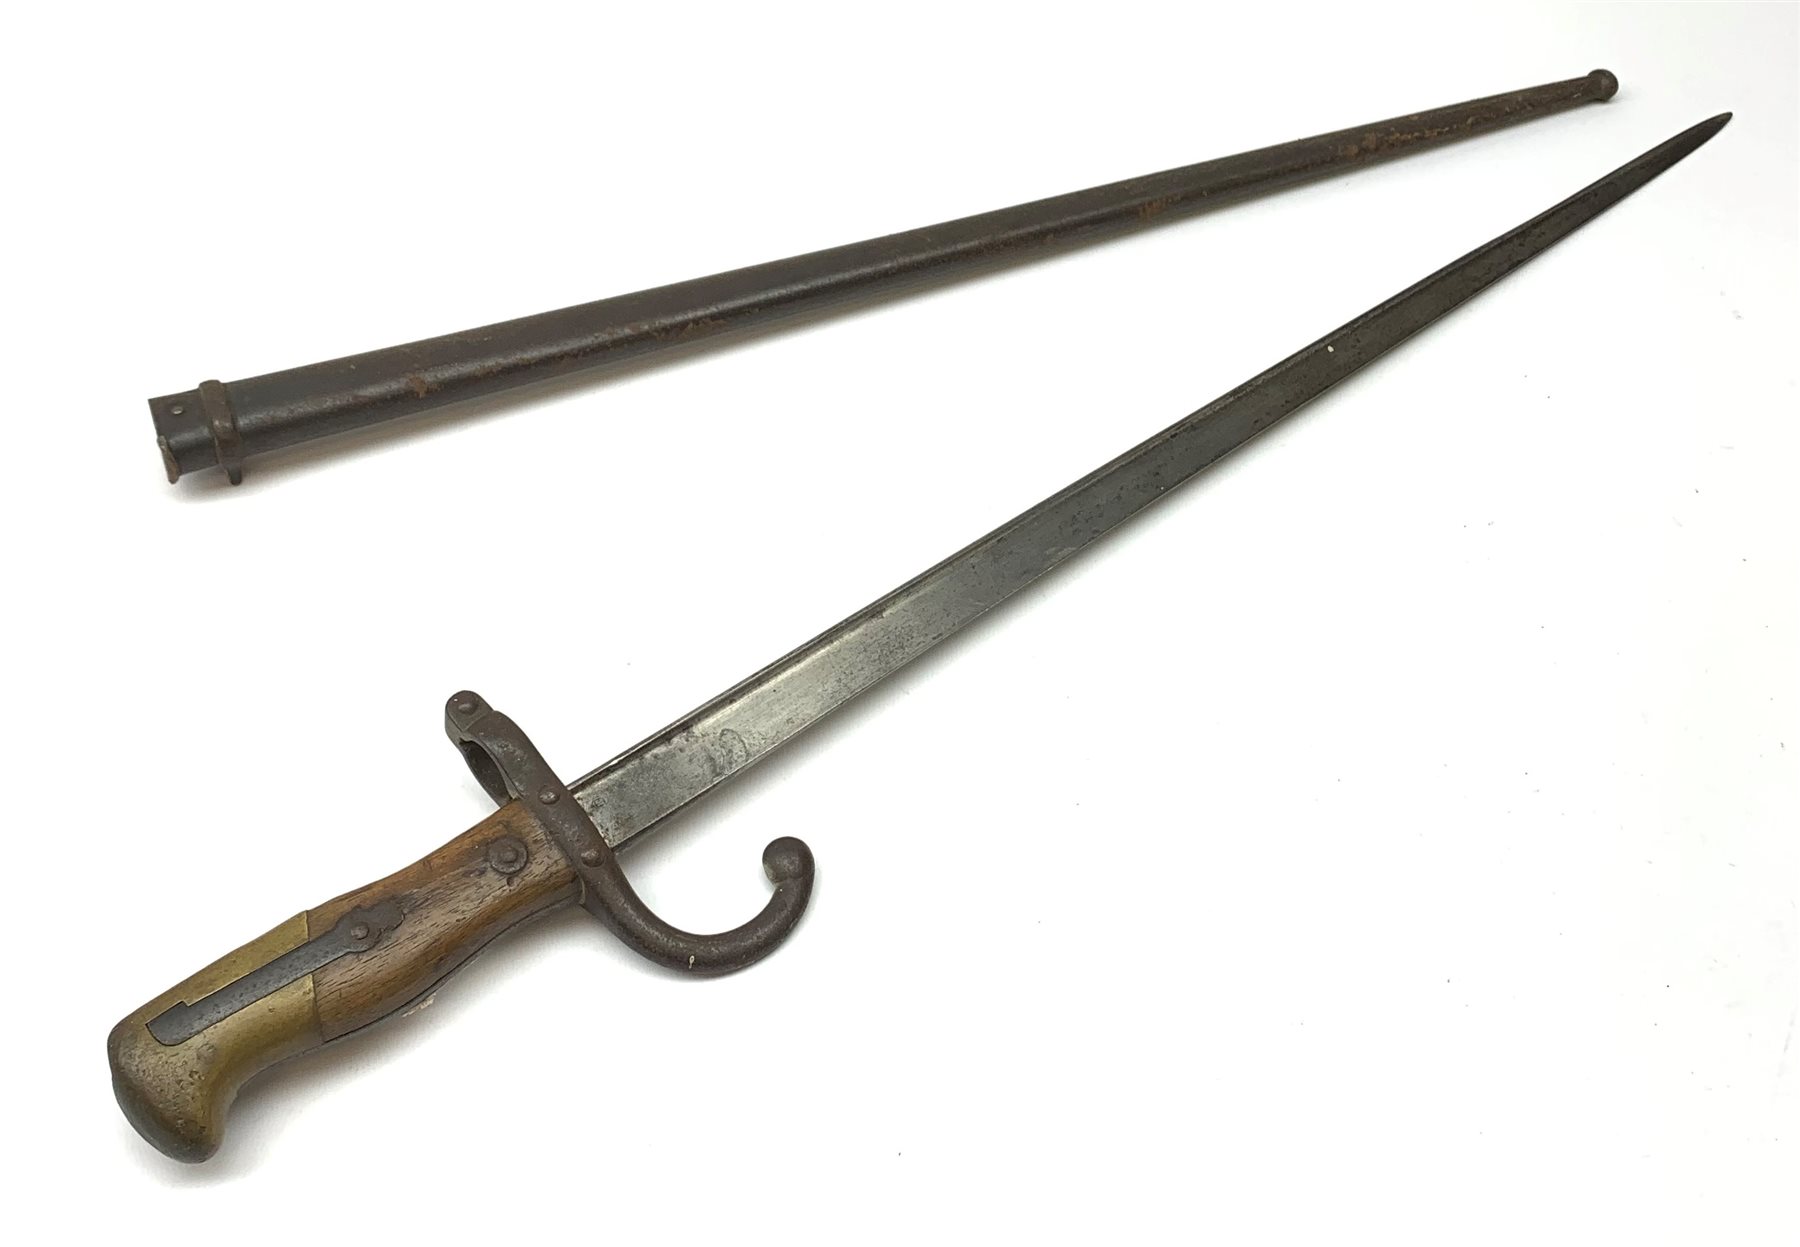 French Model 1874 Epee bayonet overall de Etienne in steel Guns, steel the & Taxidermy Pursuits, Militaria d\'Armes 1880\', \'Mre. - inscribed L66cm Sporting St. 52cm blade scabbard Janvier Country